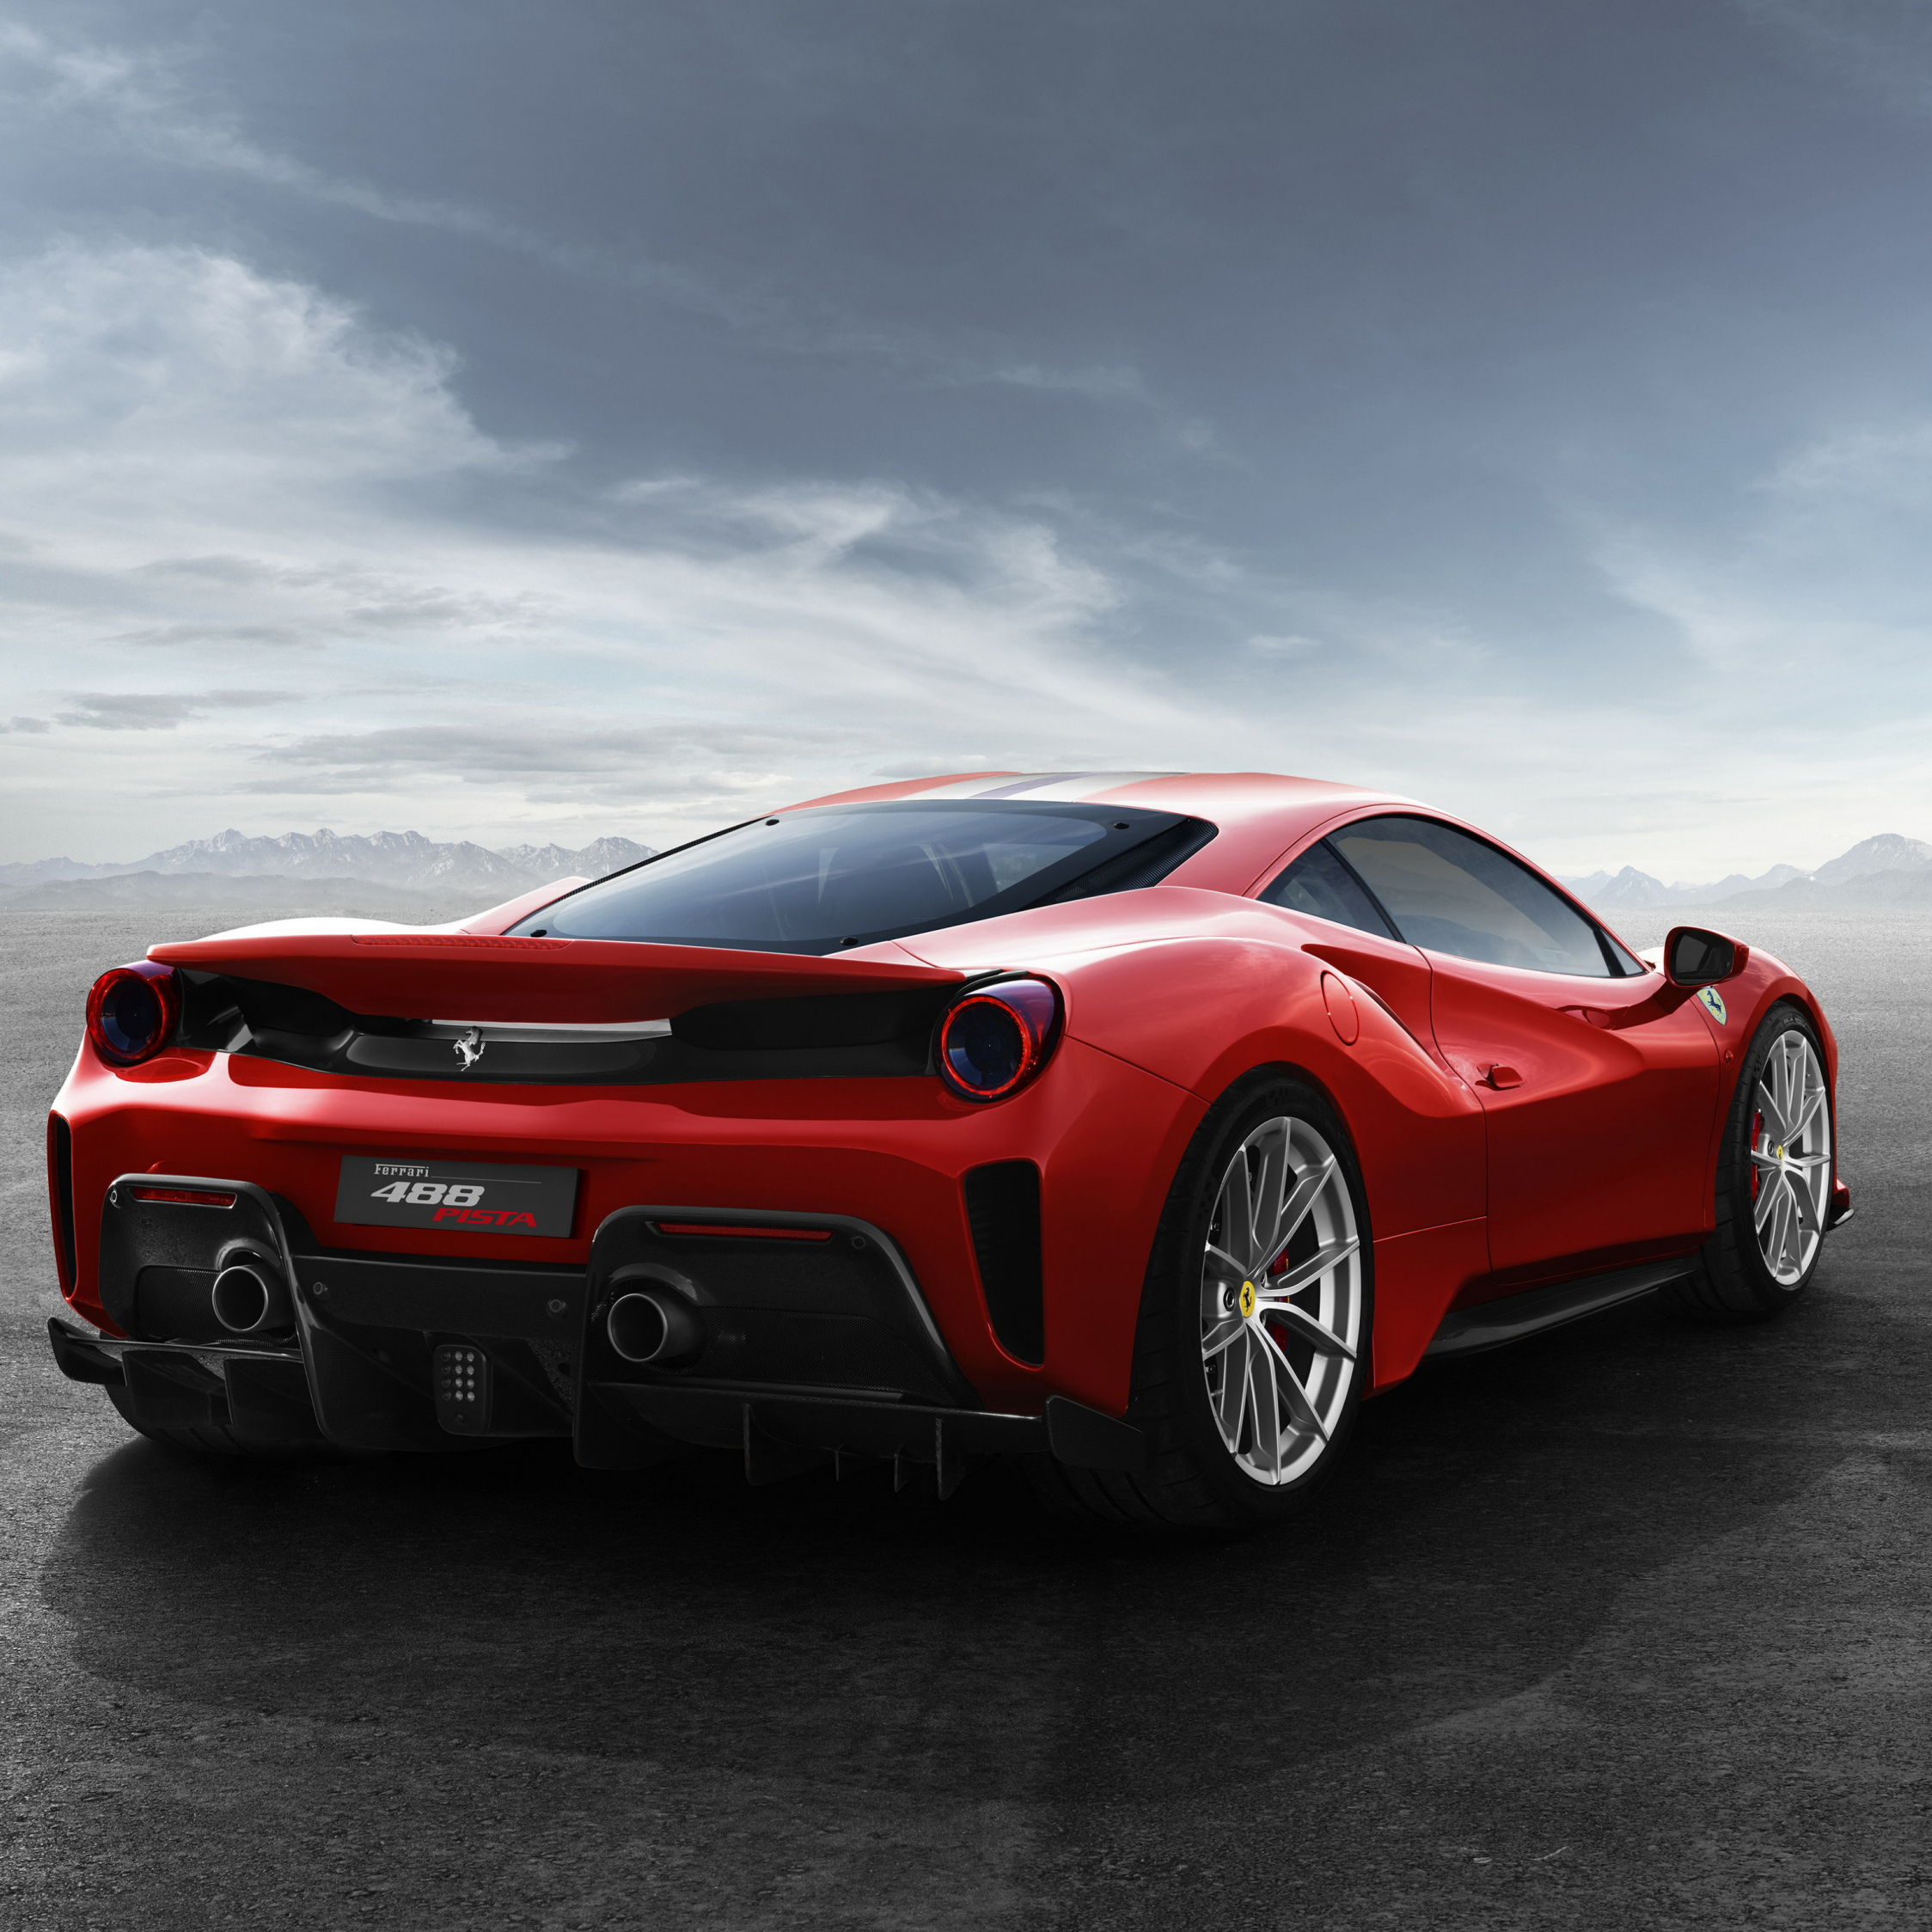 Supercars Hd Wallpapers For Ipad